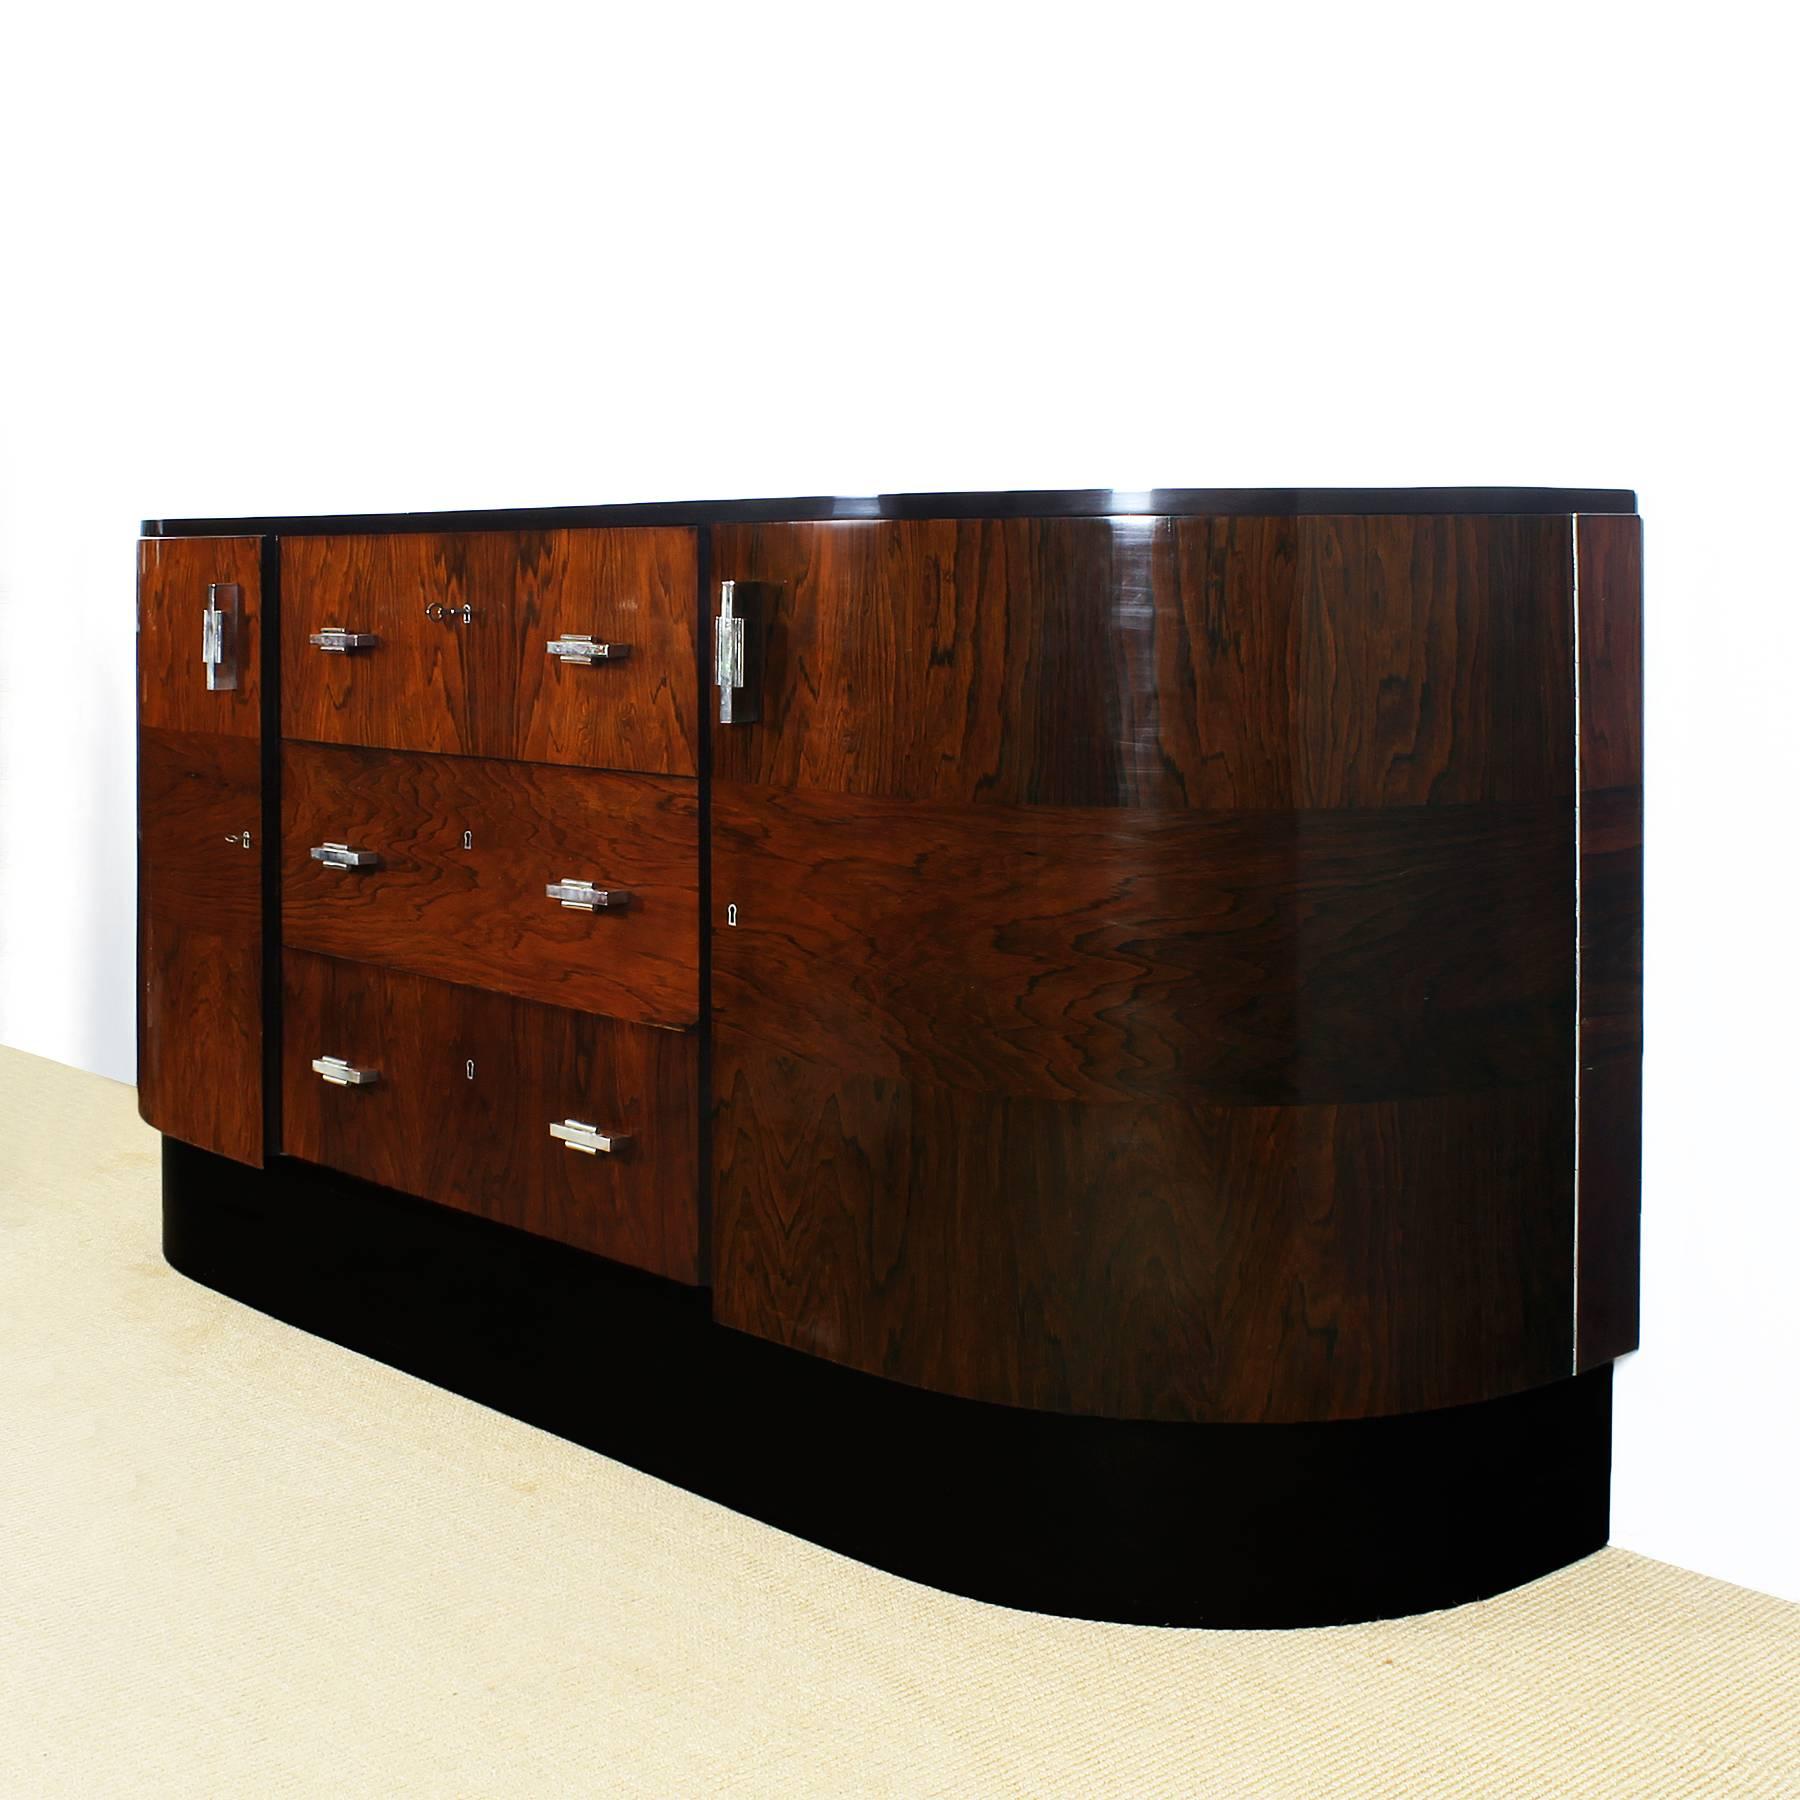 Art Deco curved sideboard, solid mahogany and Rio rosewood veneer, French polish, two-doors with shelves inside and three drawers, stained mahogany base, nickel-plated brass handles and hardware.
Maker: Casa Reig
Spain, Barcelona